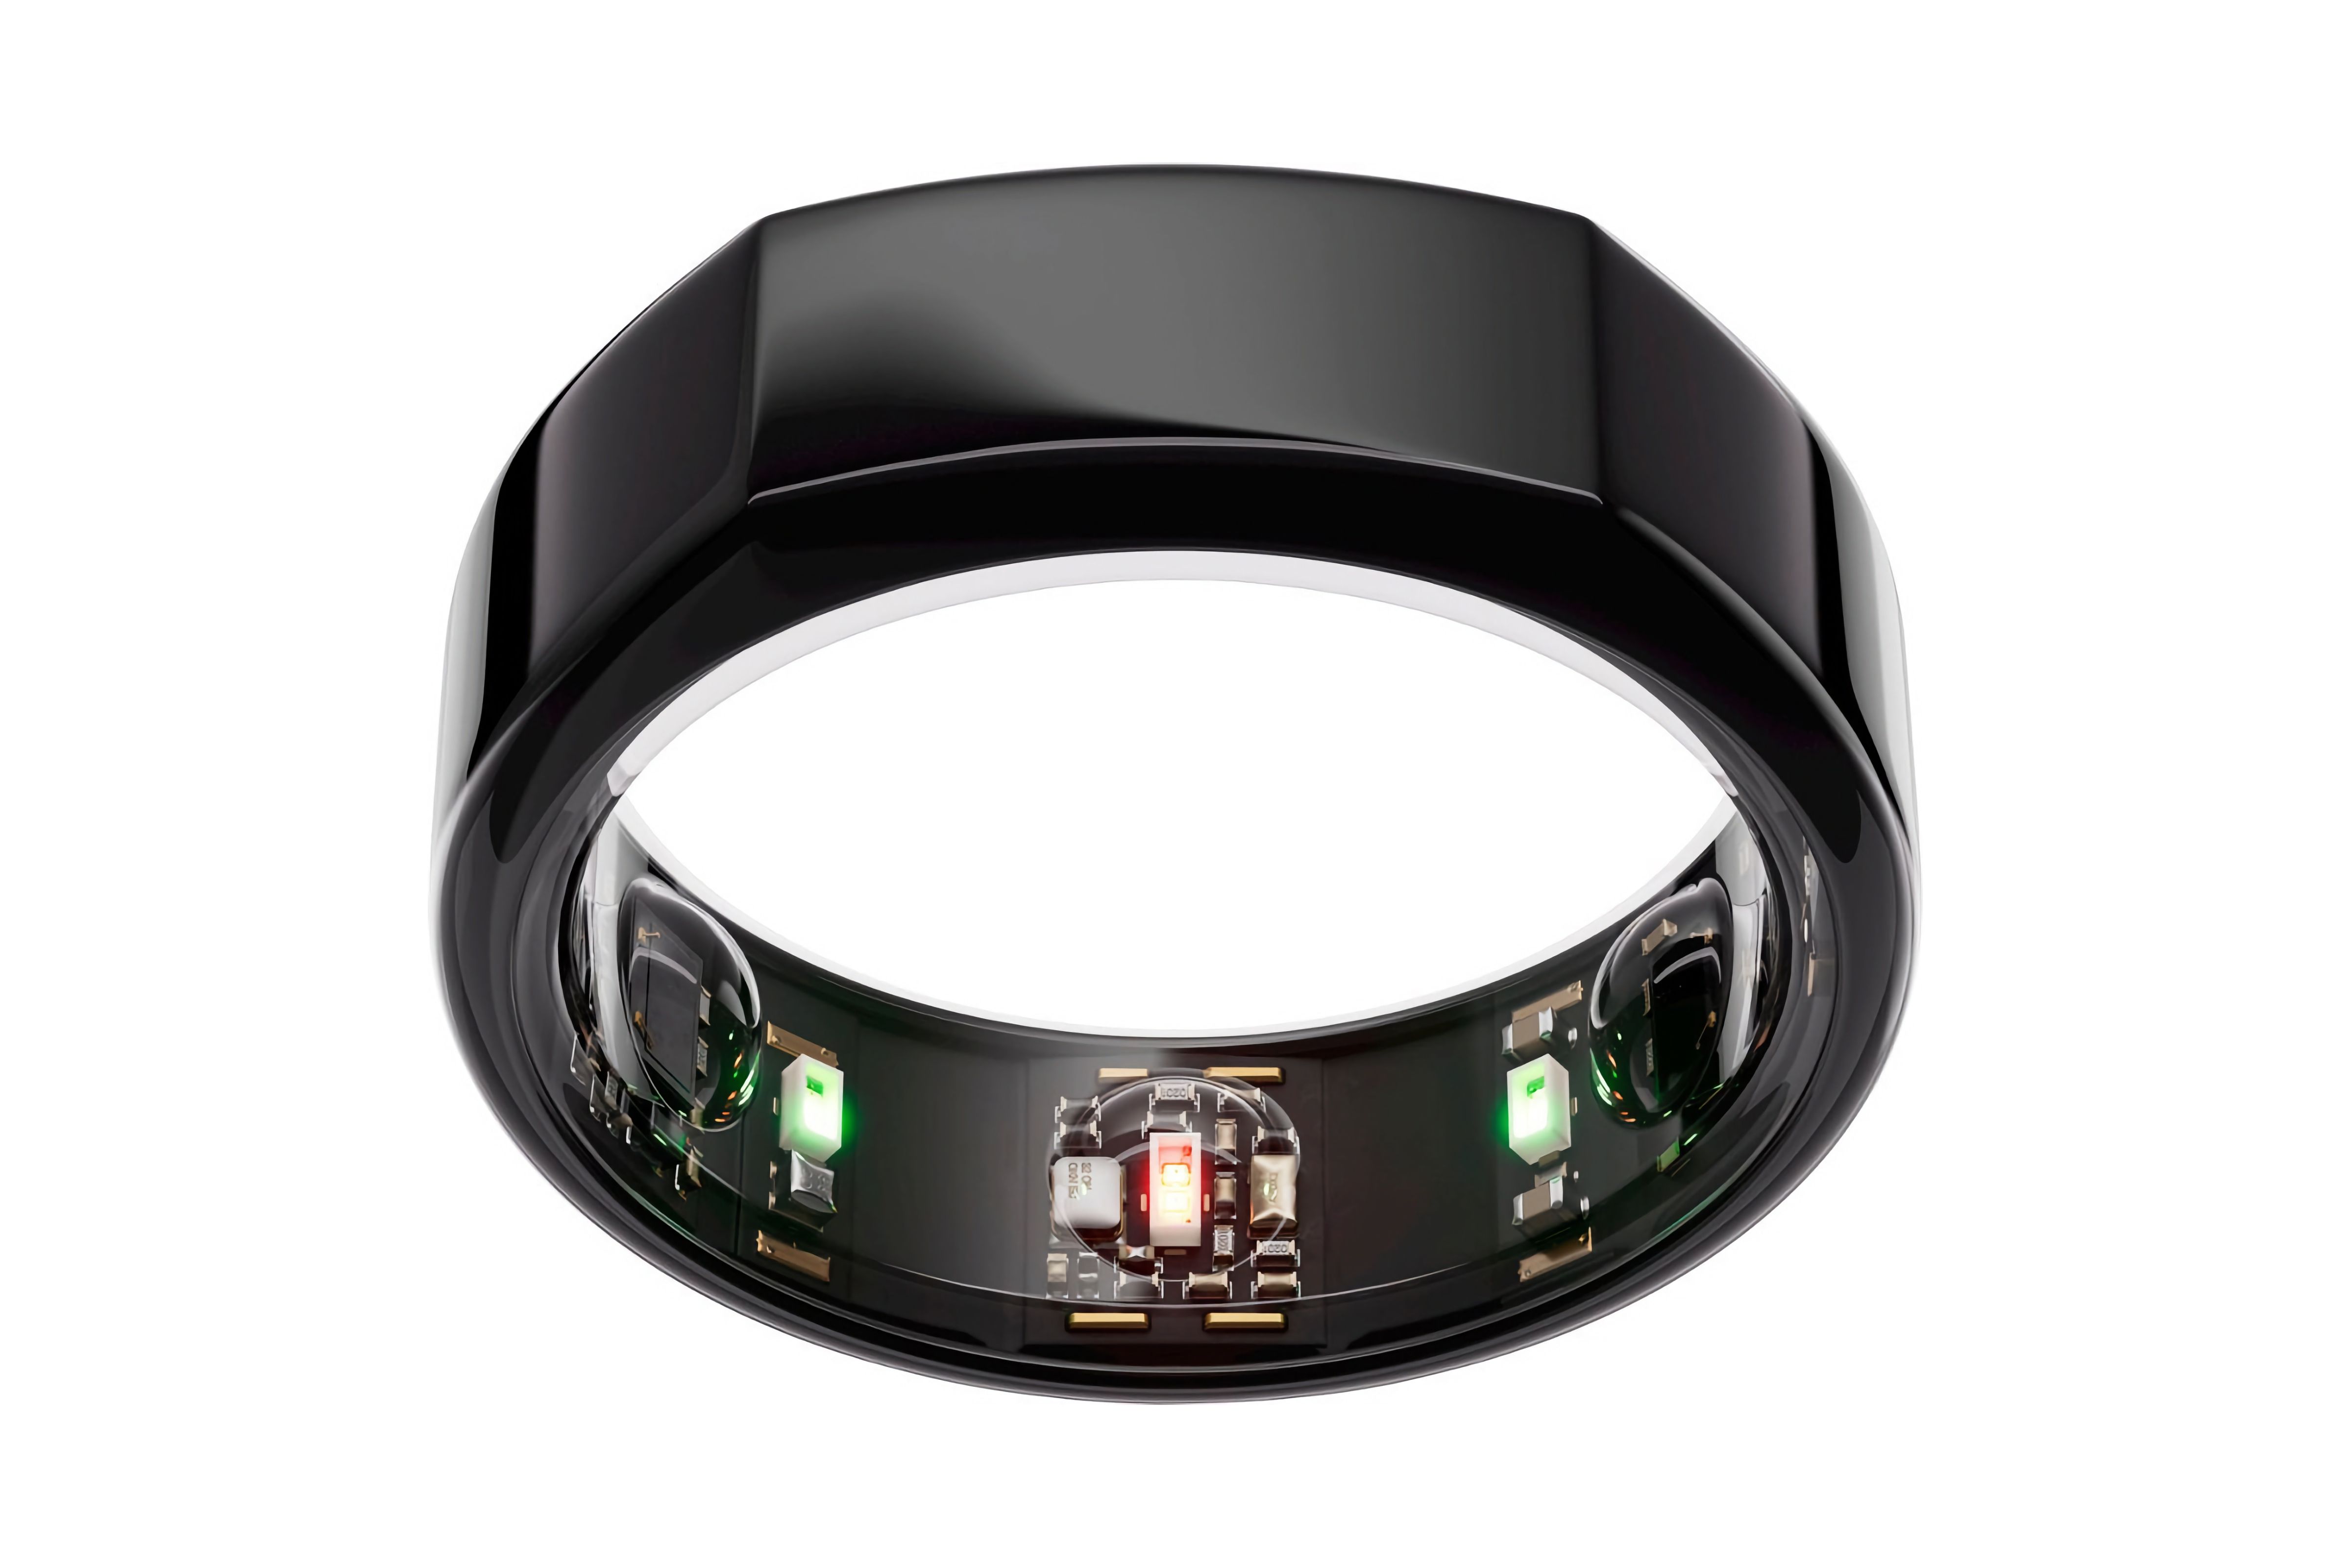 A black ring with three bumps on the inside, a flat side on the top, and visible circuitry under plastic.